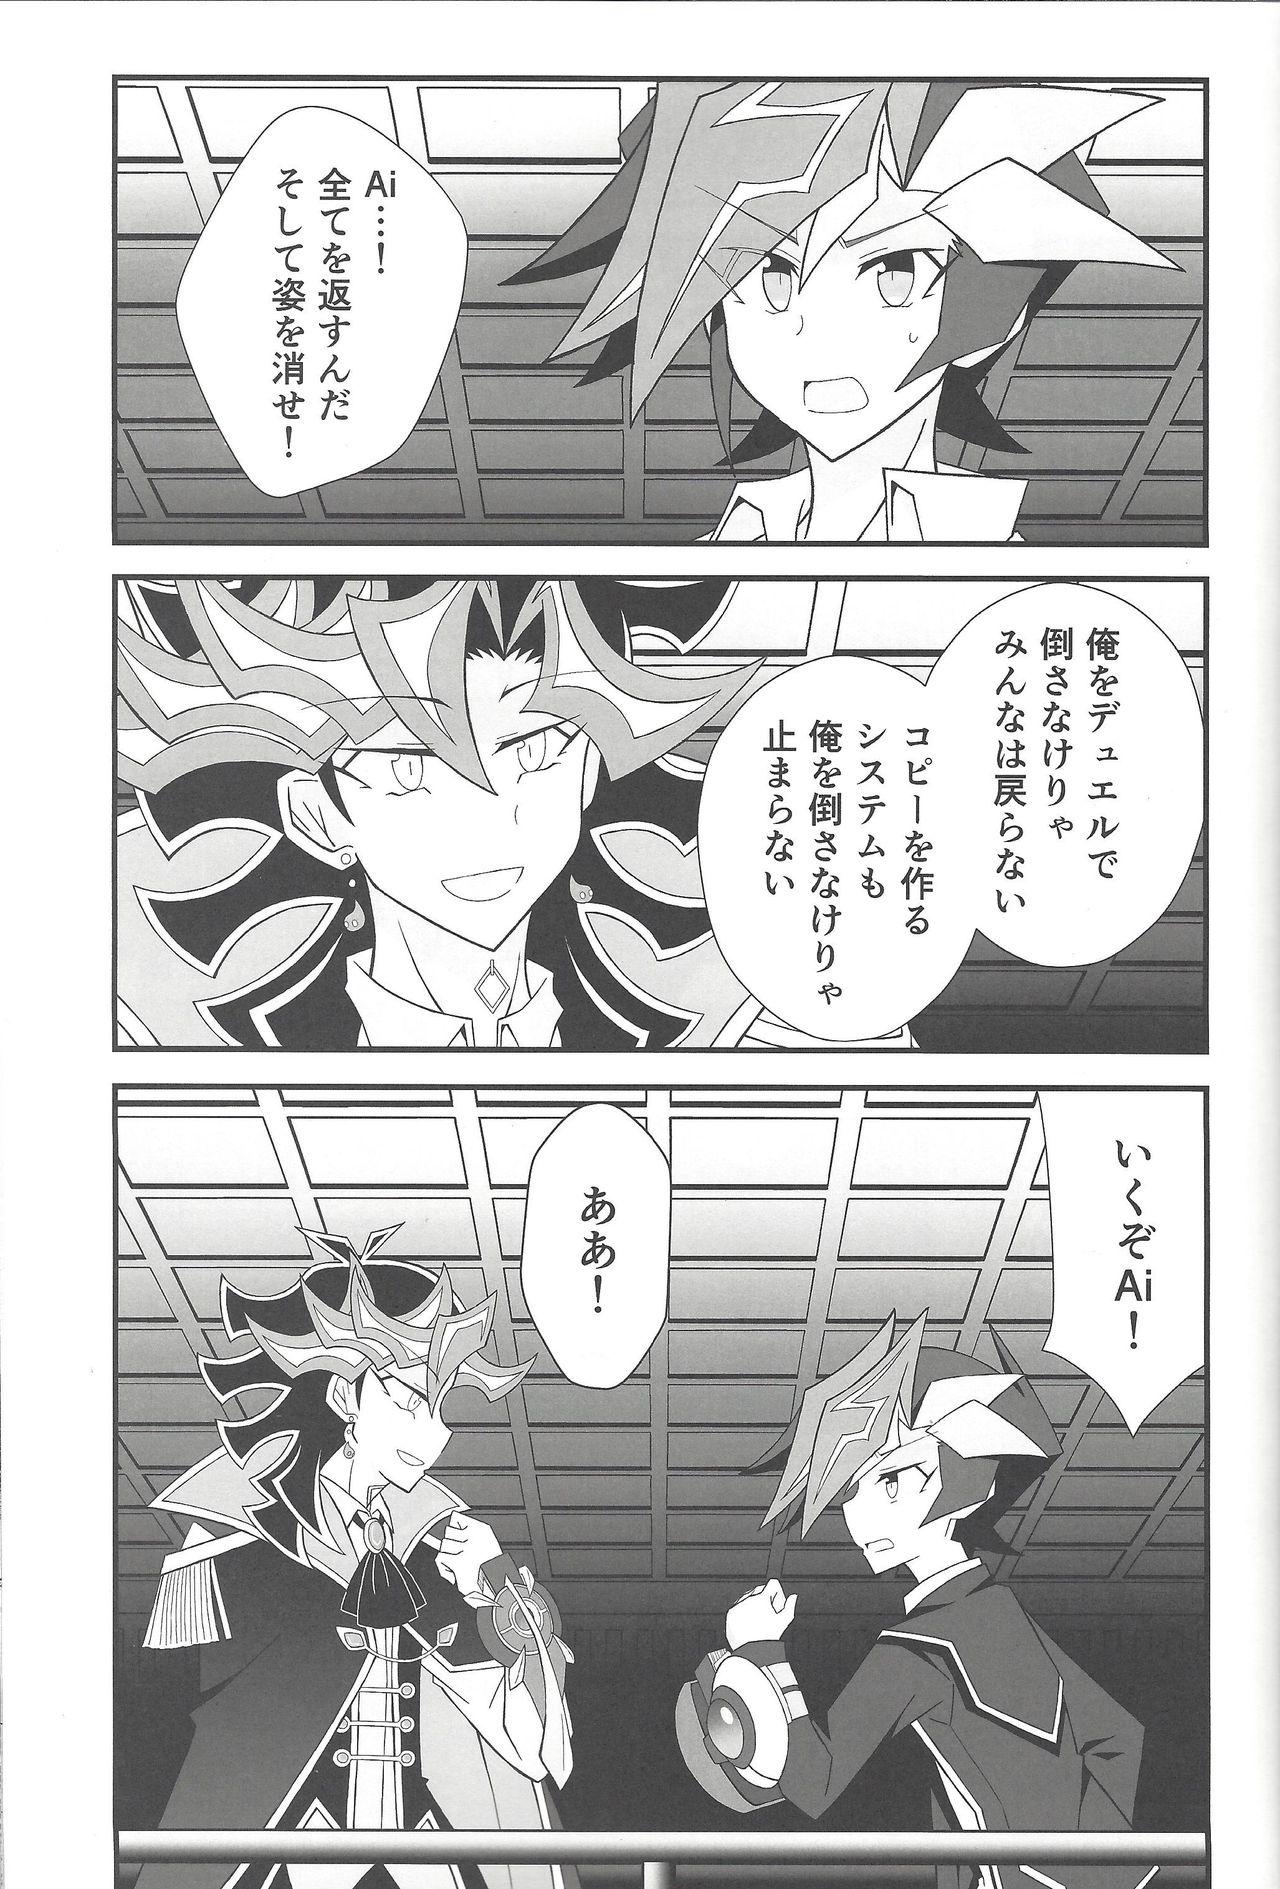 Naked Sex Happy End - Yu gi oh vrains Old Young - Page 3